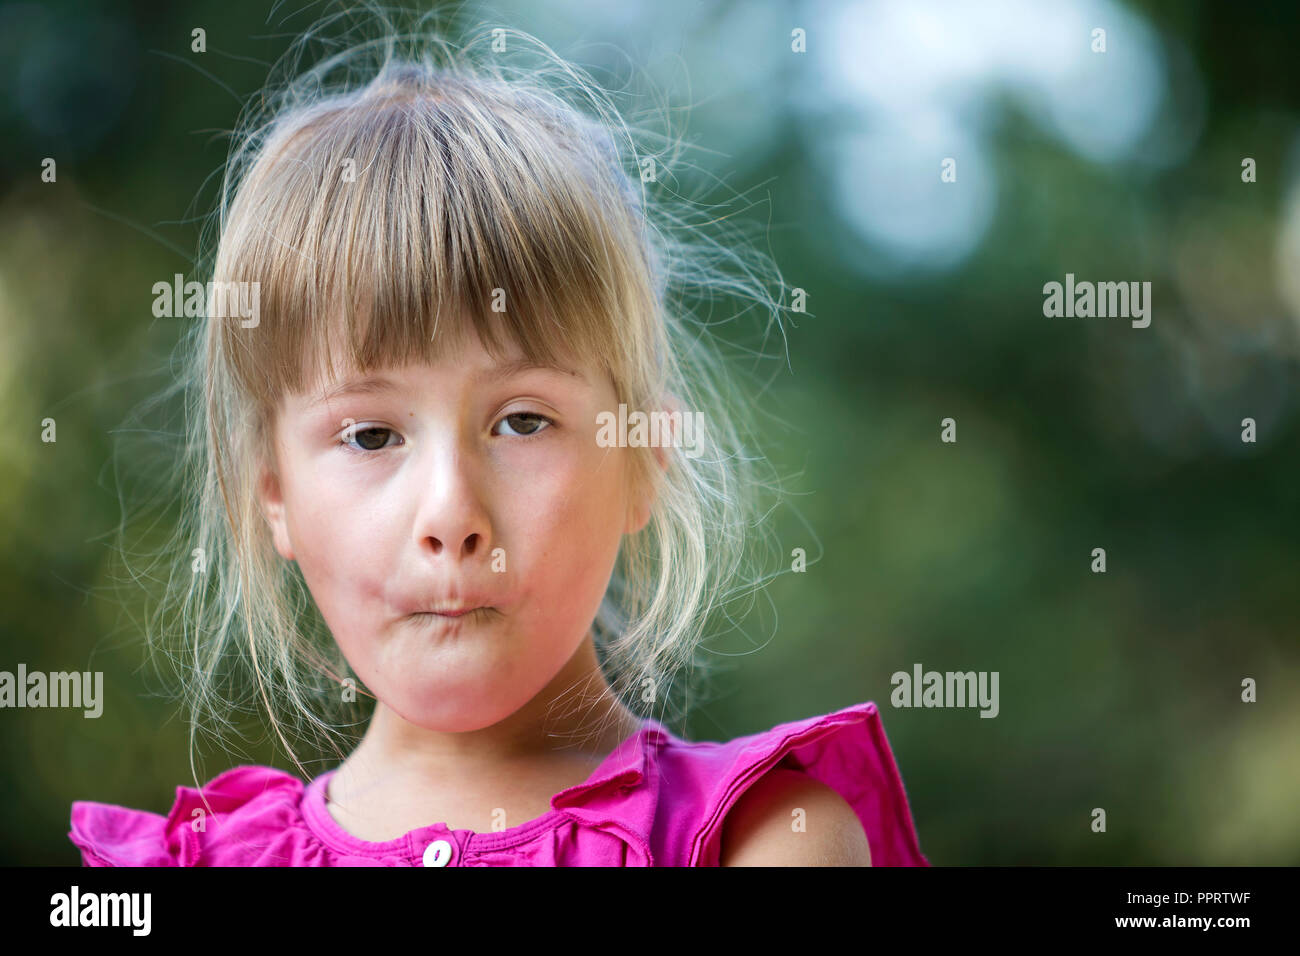 Portrait Of Little Cute Pretty Young Child Girl With Gray Eyes And